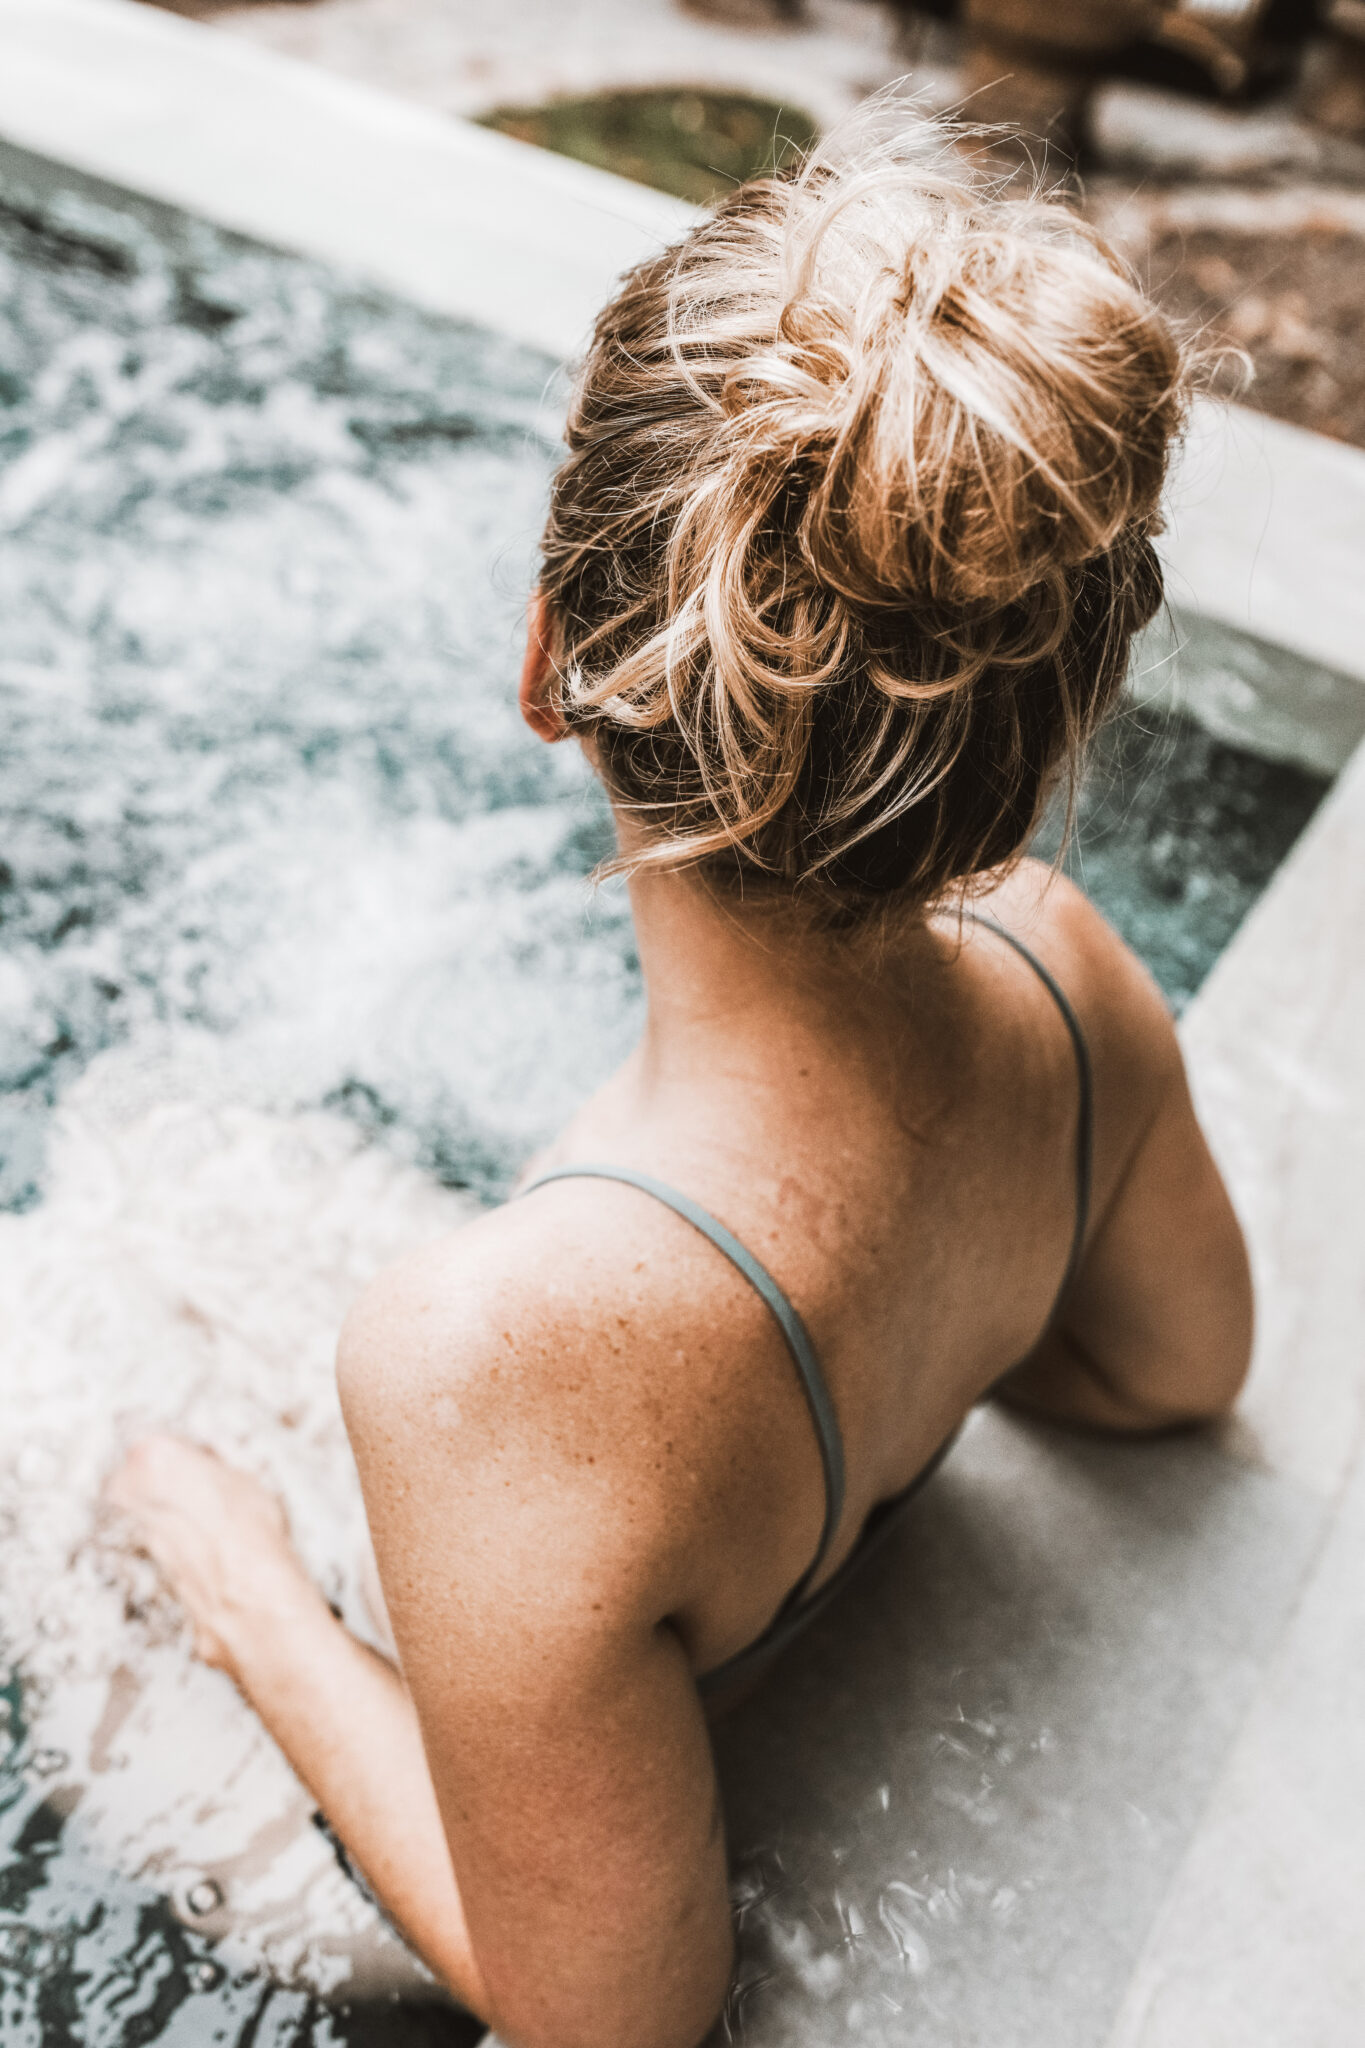 Woman is facing away from the camera and is enjoying a dip in a hot tub. This article covers why you should treat yourself to a trip to a wellness spa.